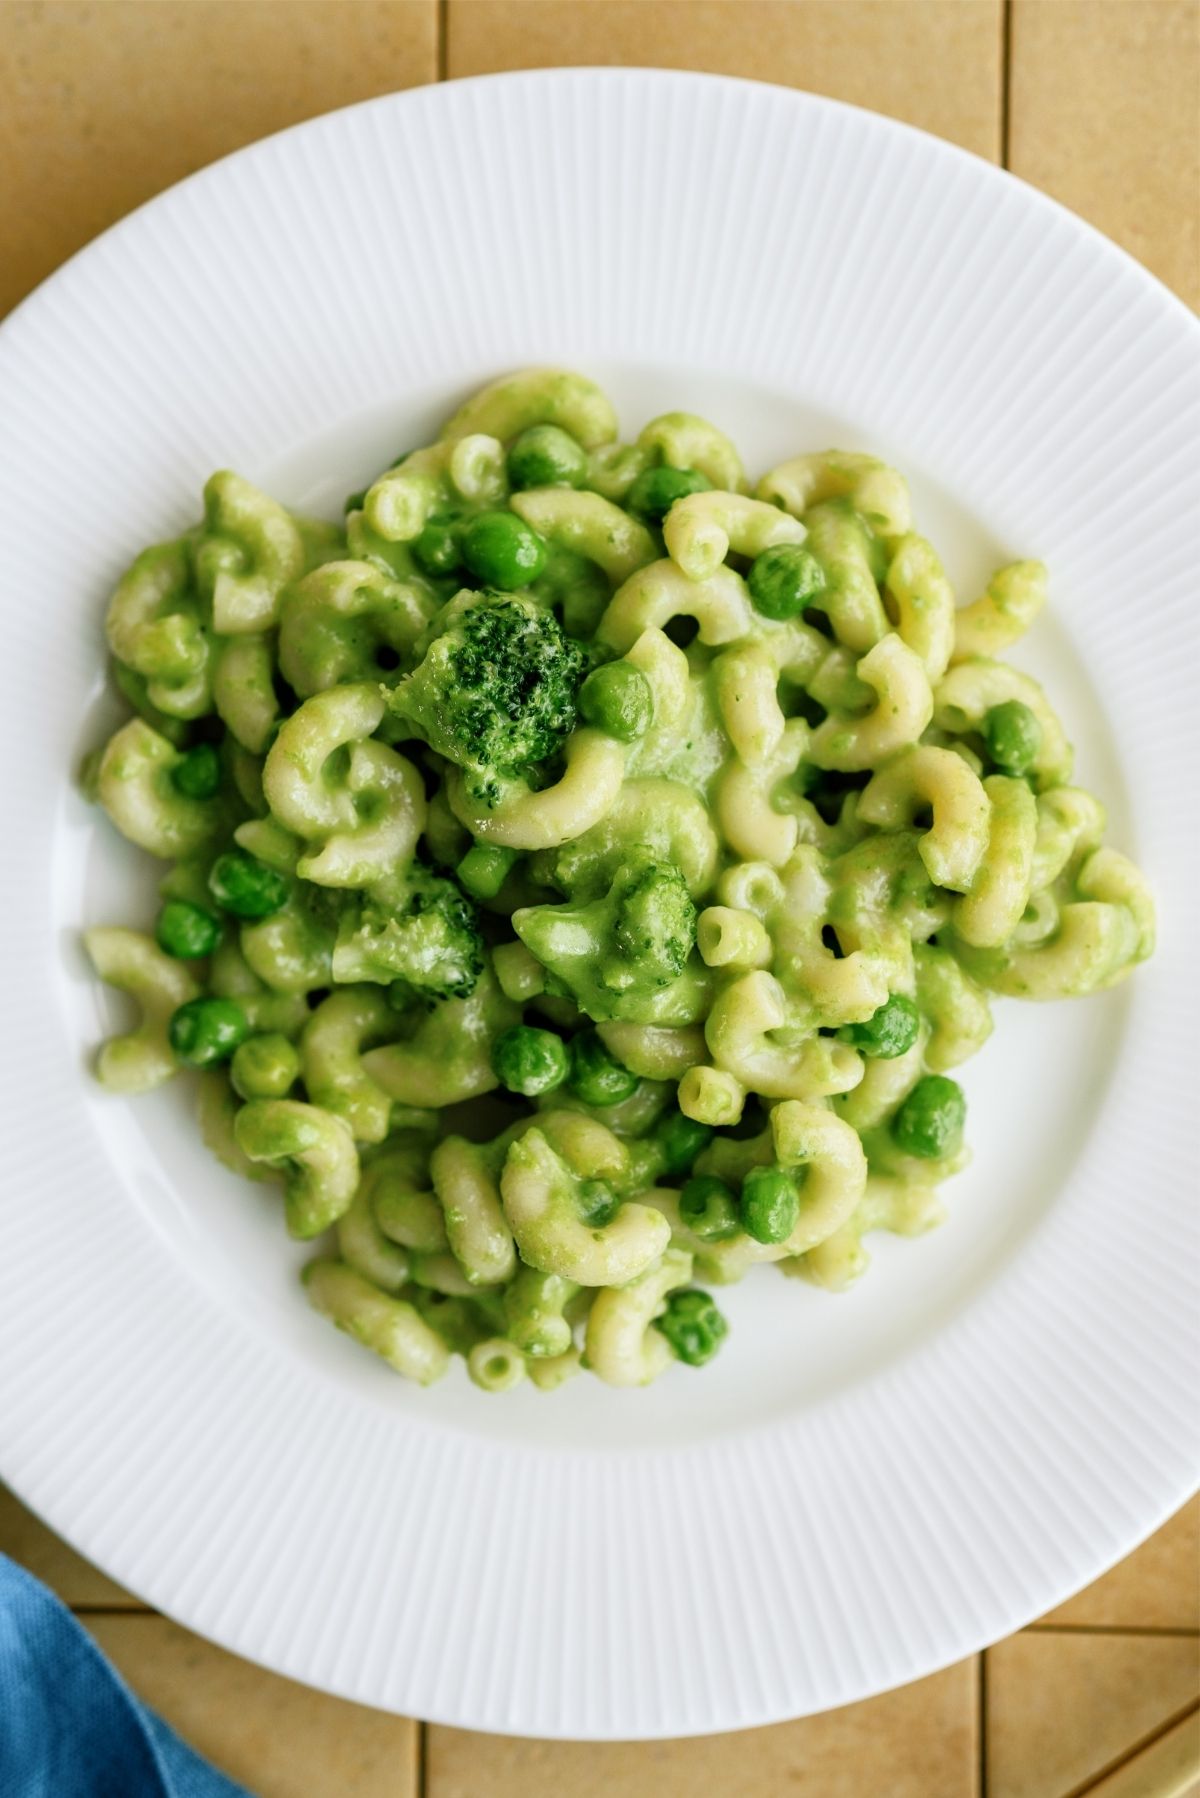 Green Mac and Cheese without Food Coloring Recipe